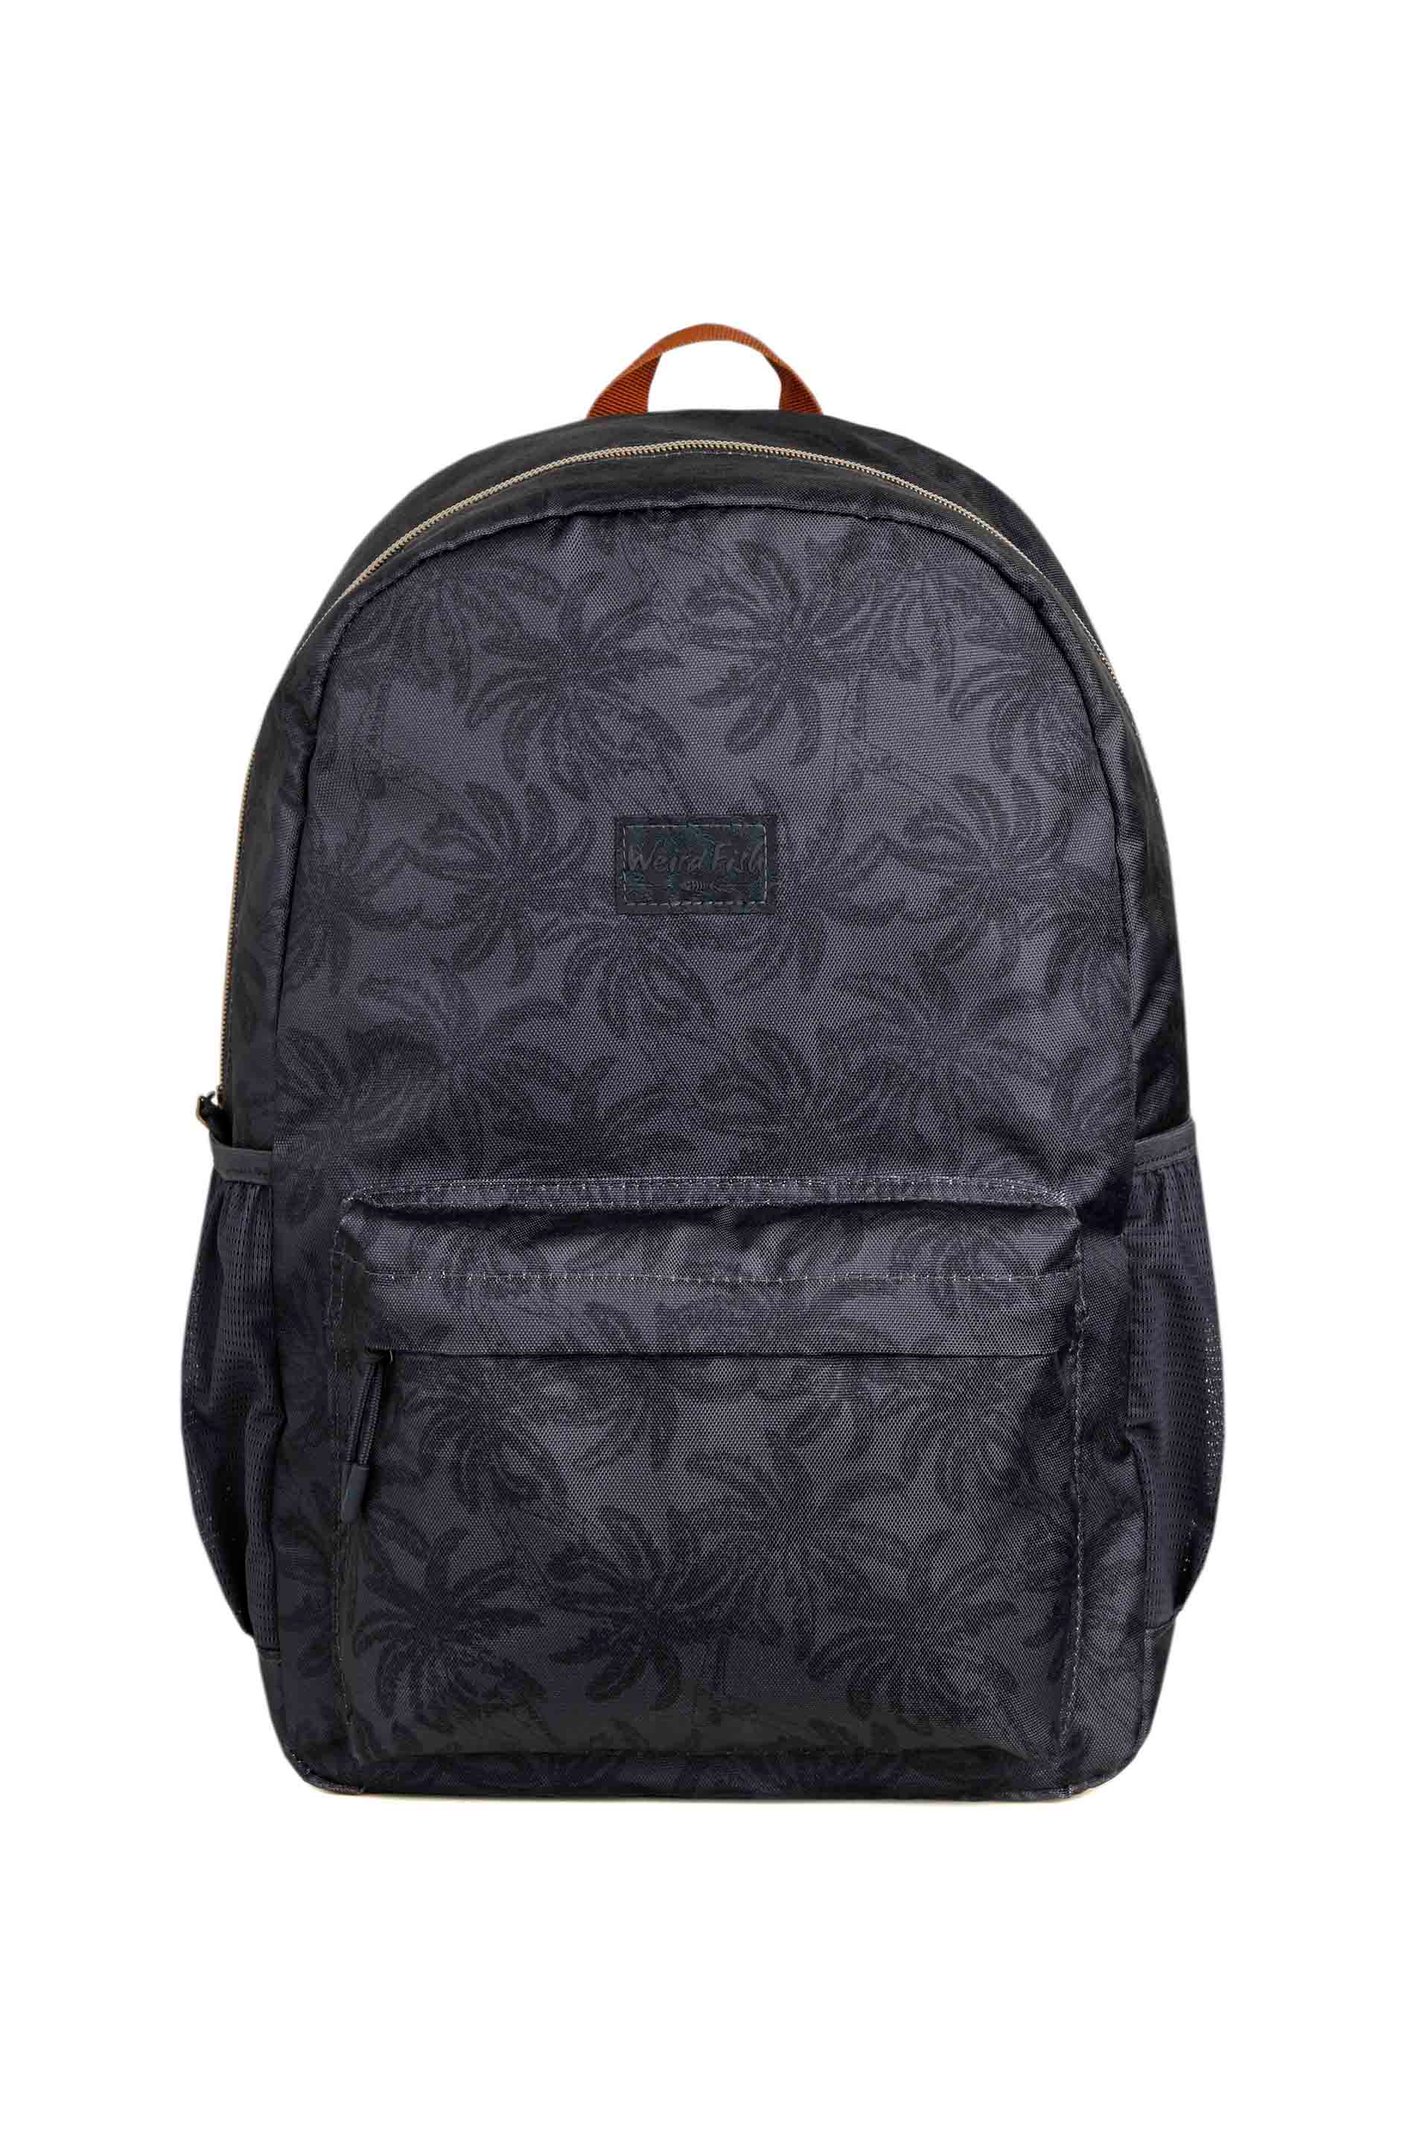 Weird Fish Daisy Printed Backpack Navy Size ONE